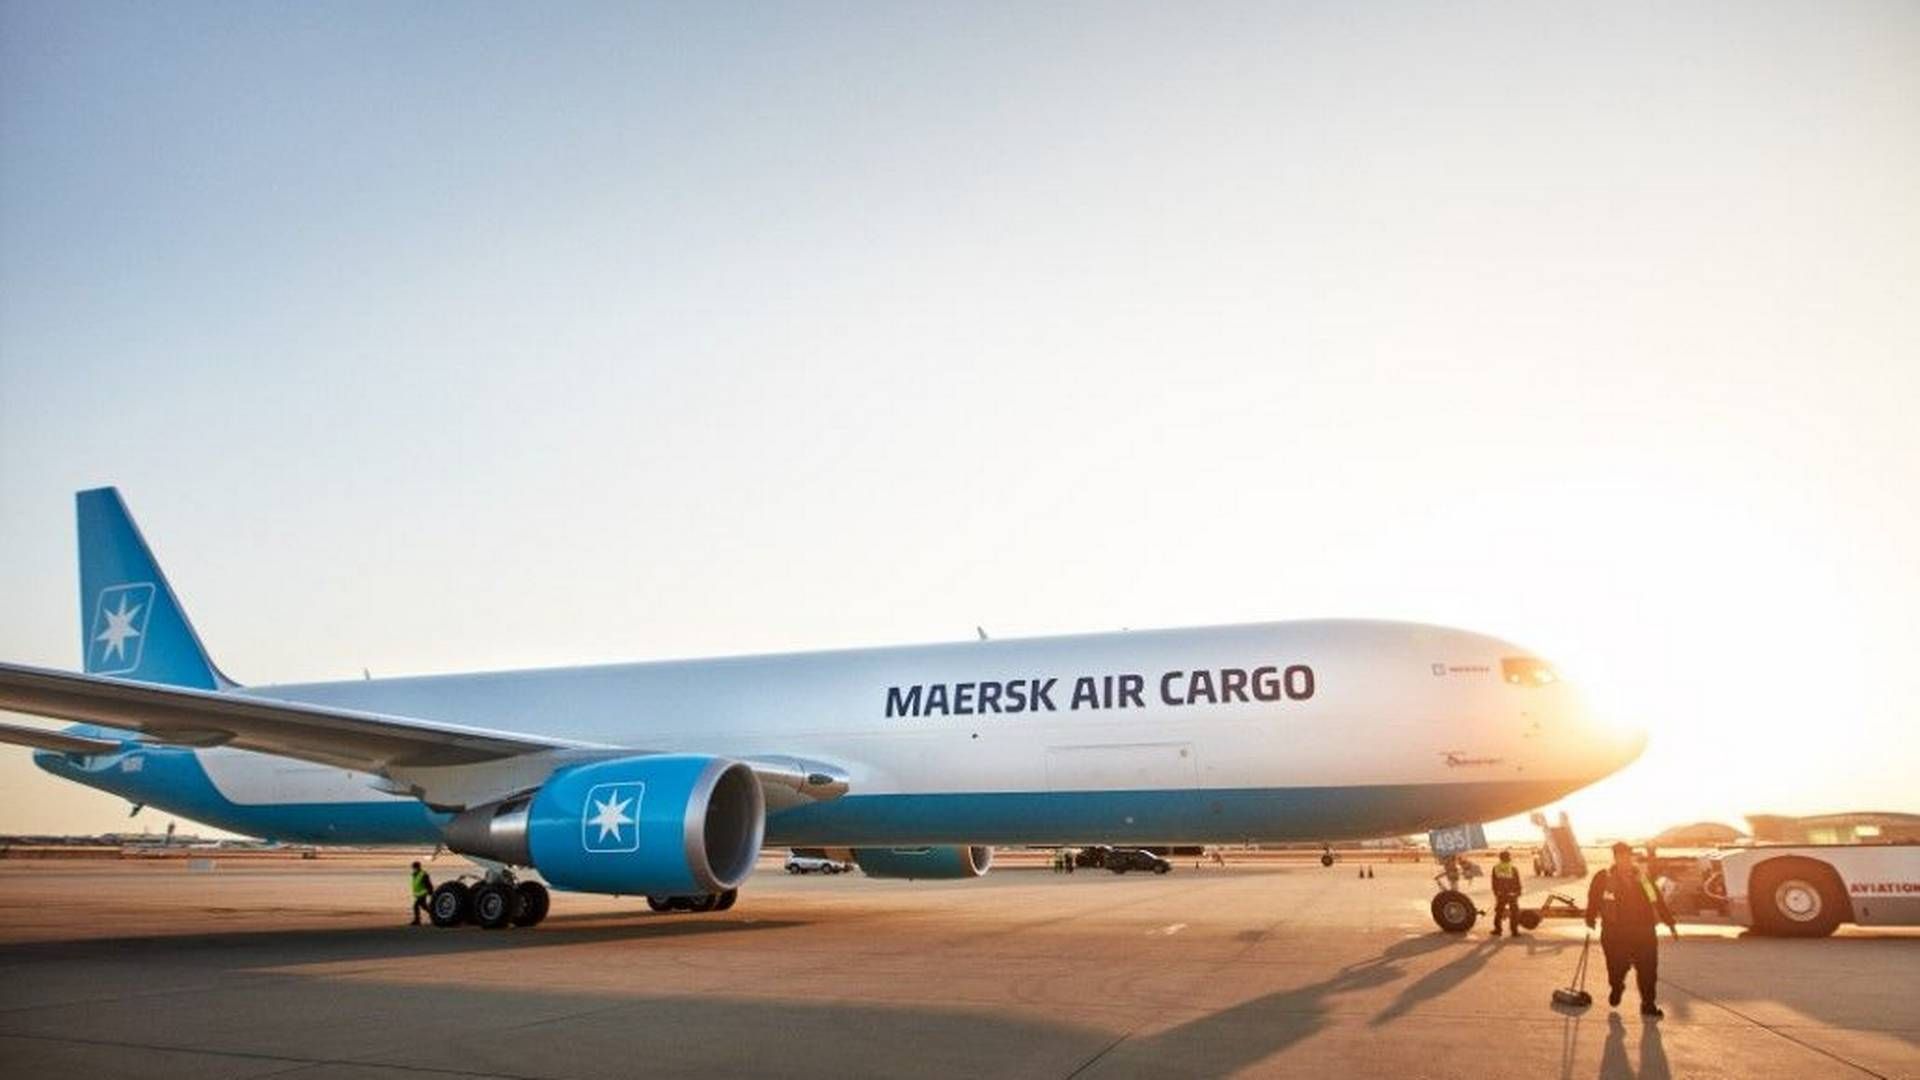 Maersk expands its air cargo business. | Photo: Mærsk